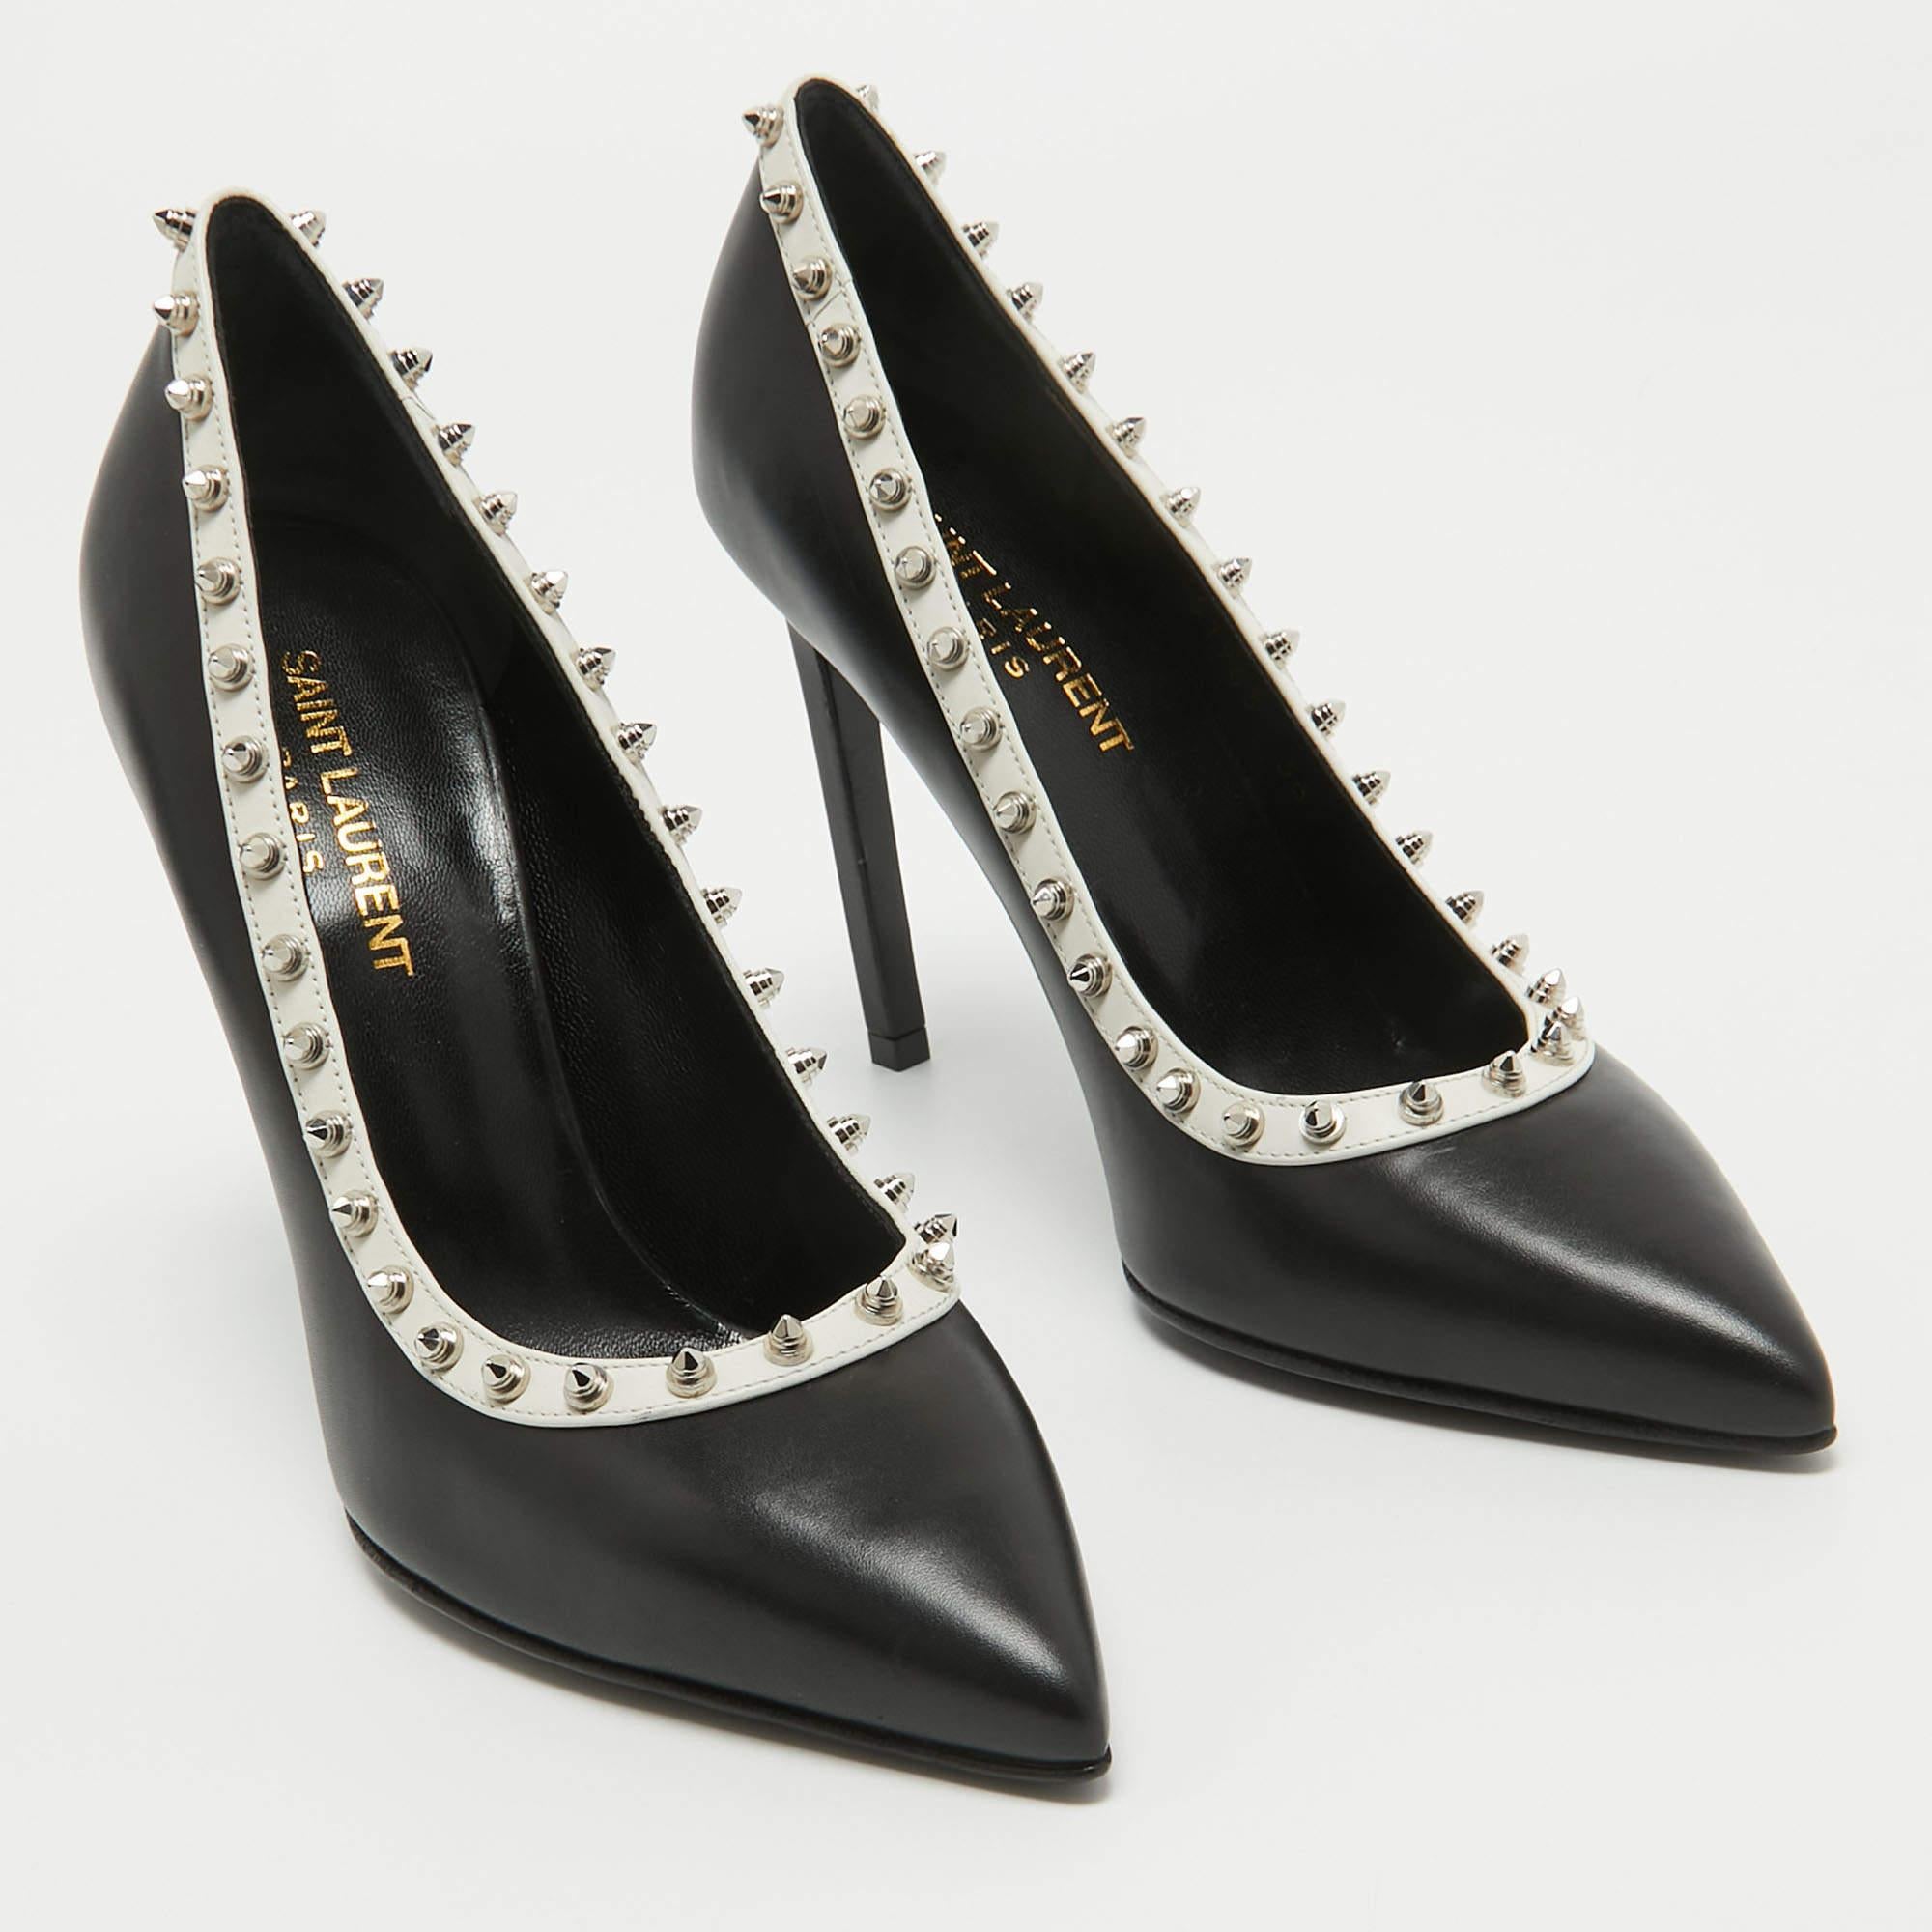 Saint Laurent Black/White Leather Studded Pointed Toe Pumps Size 36 In New Condition For Sale In Dubai, Al Qouz 2